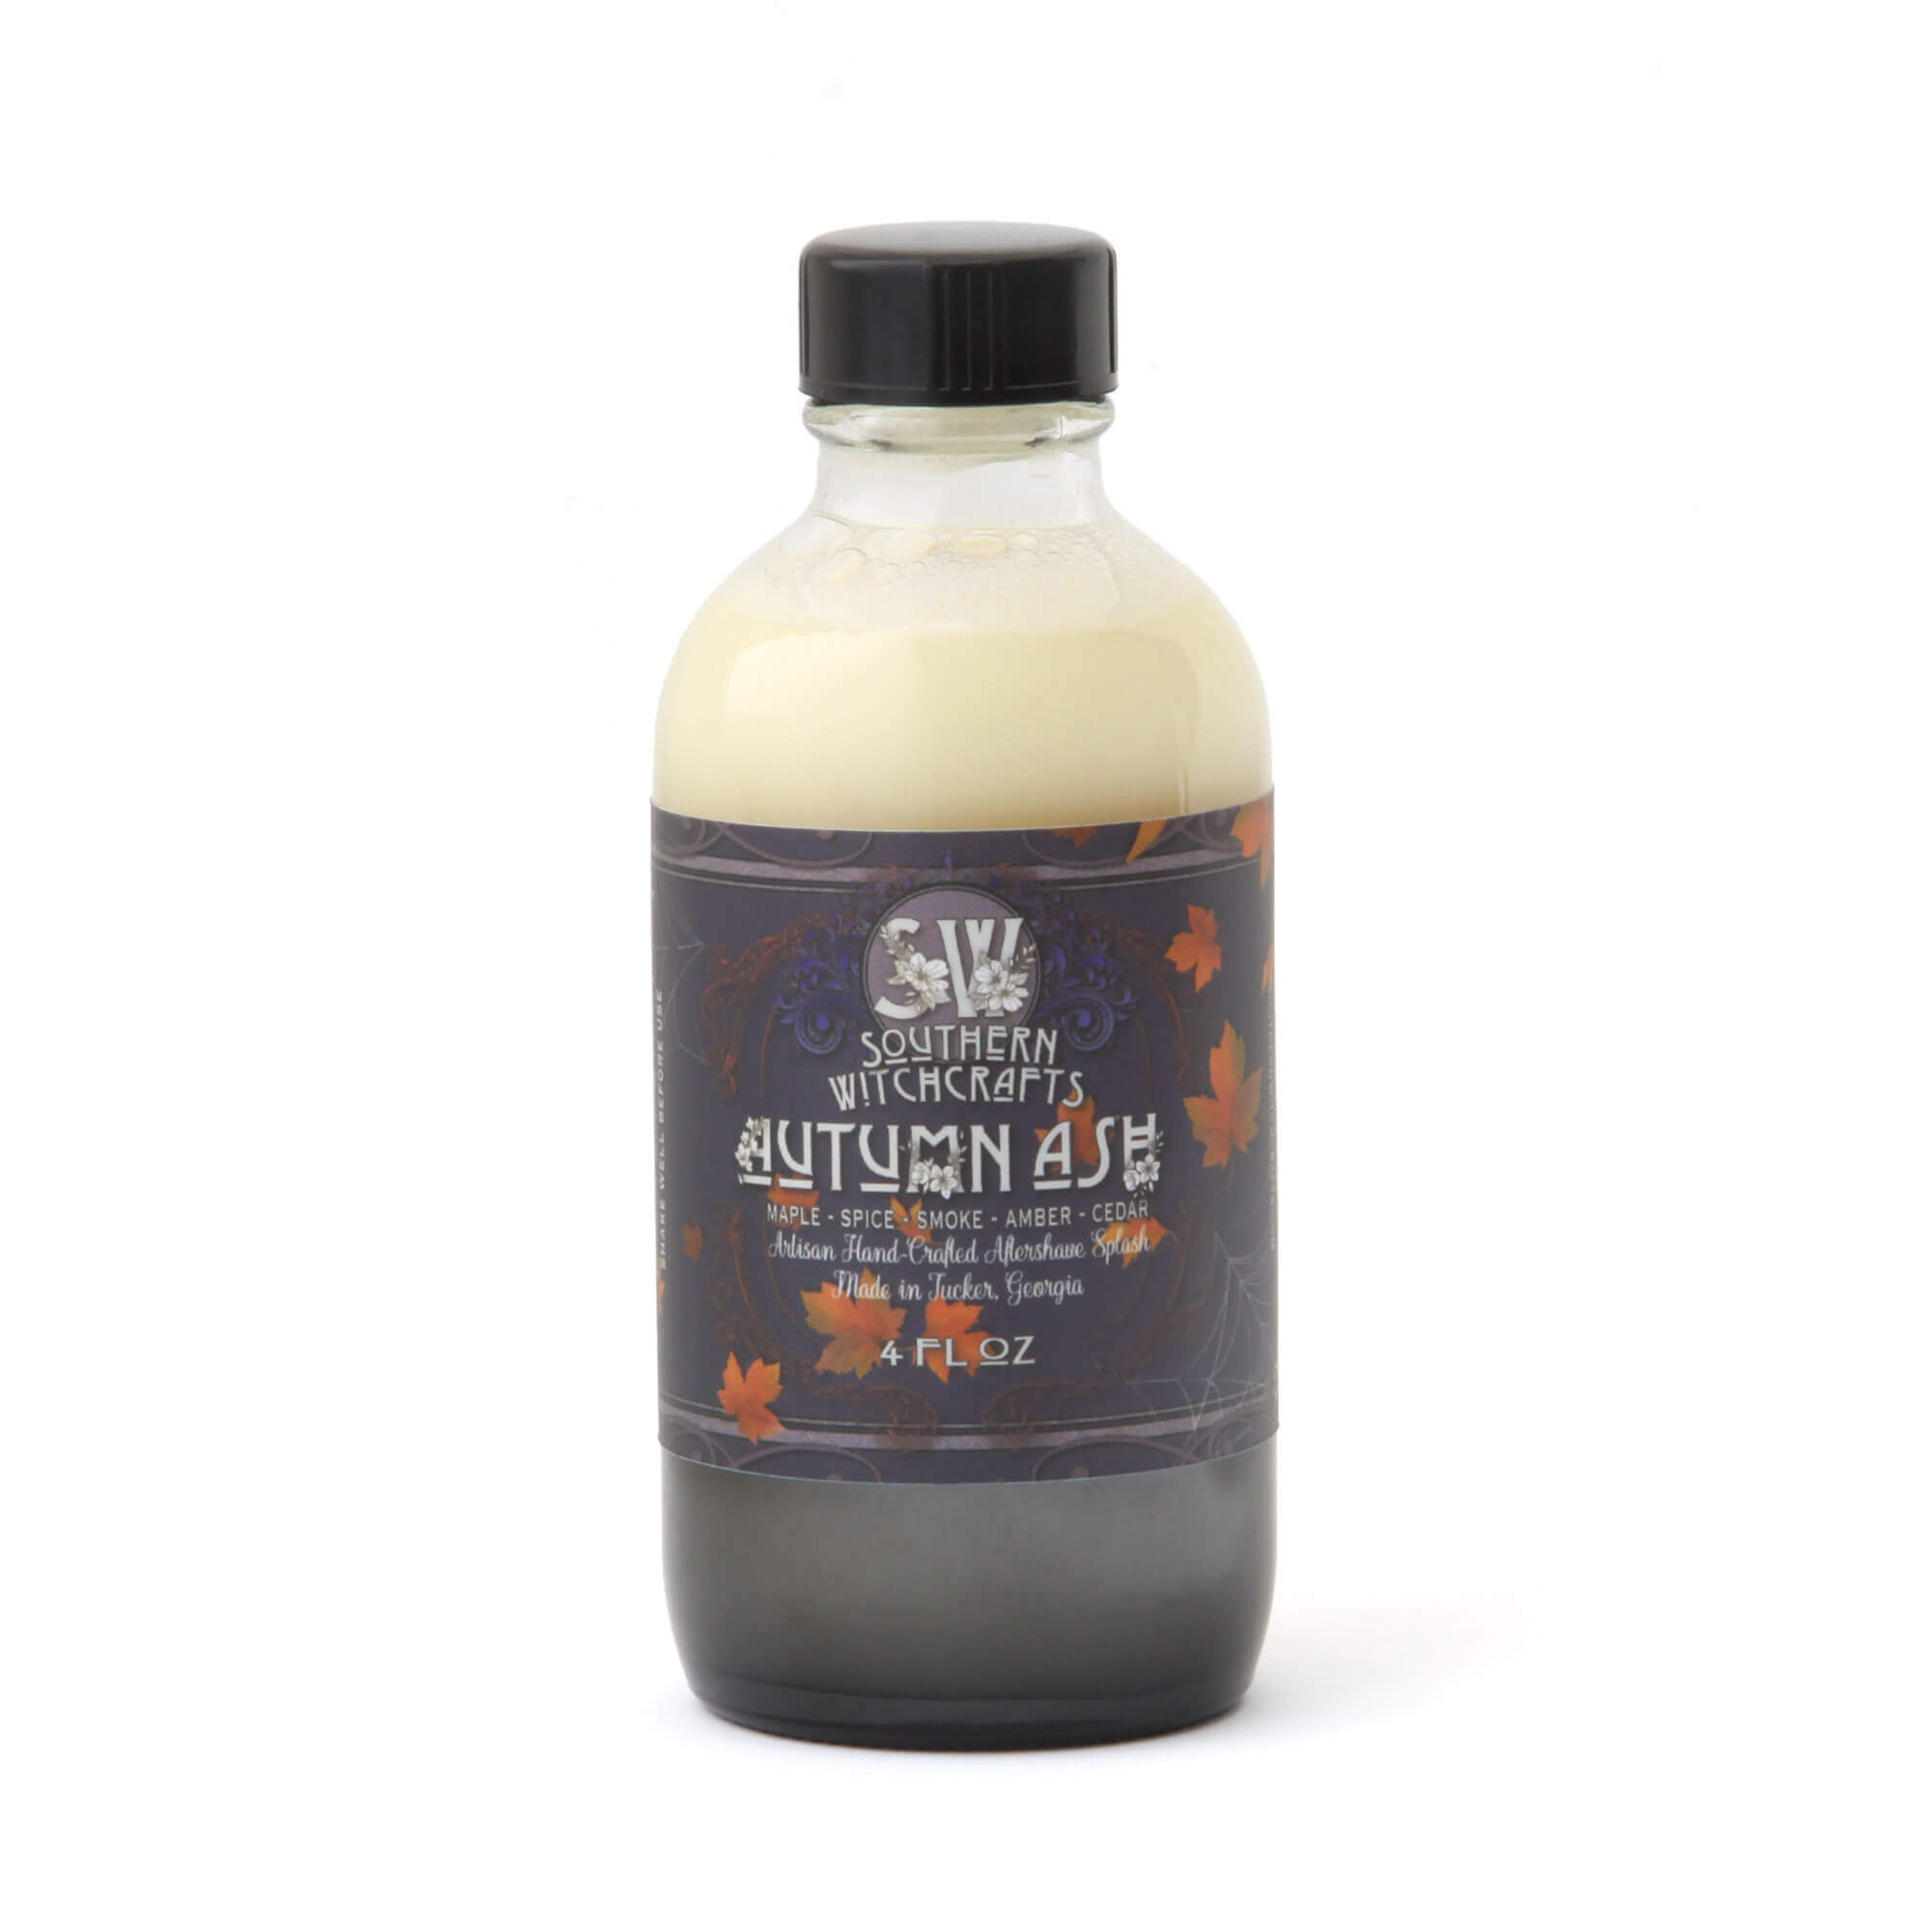 Southern Witchcrafts Autumn Ash Aftershave Splash